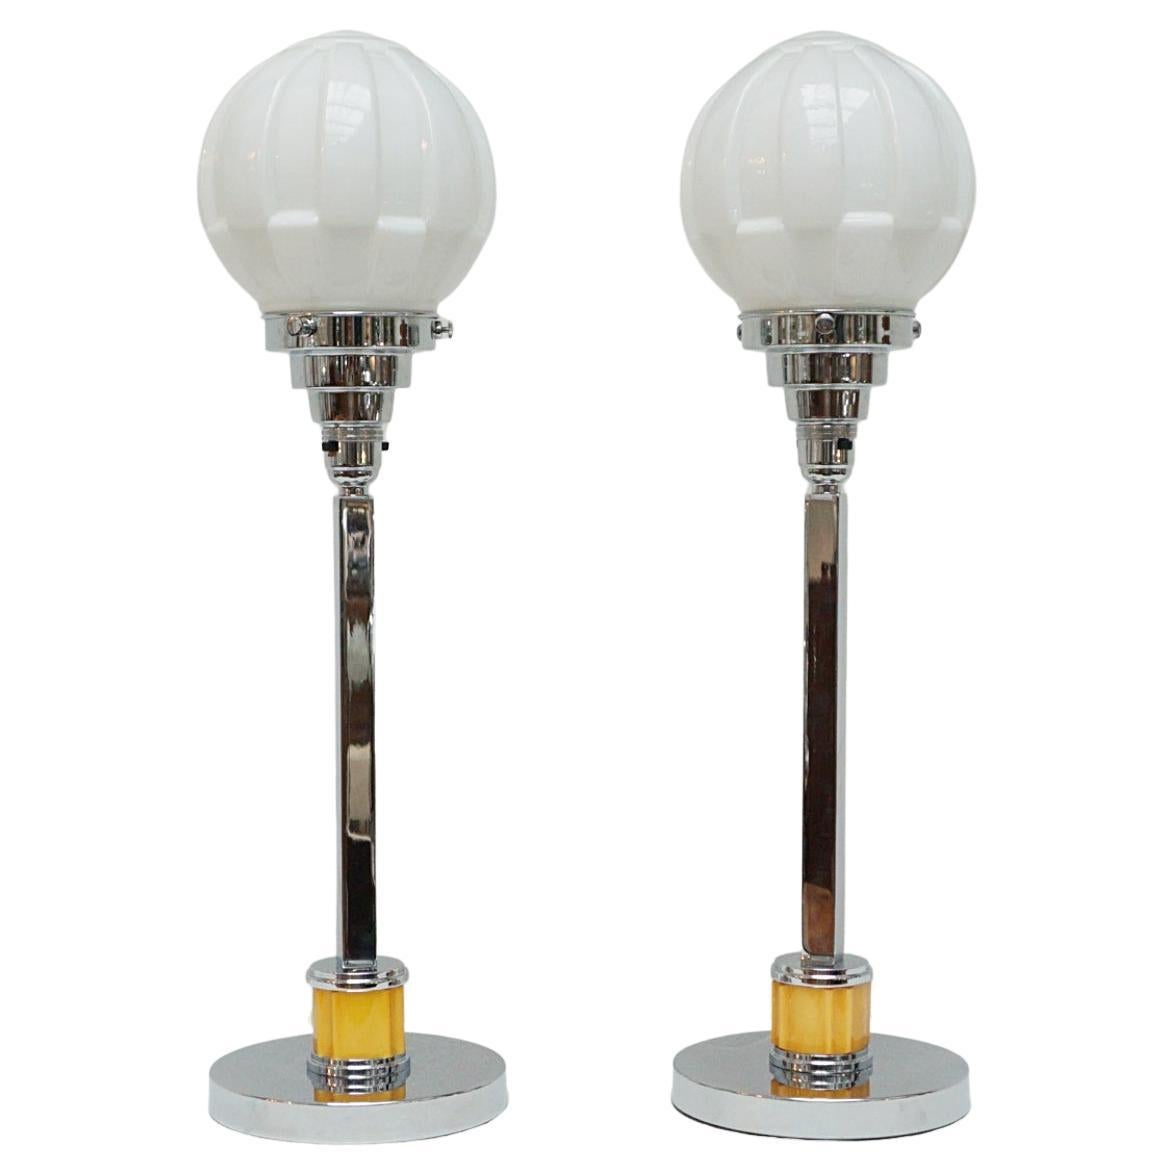 A Pair of Tall Art Deco Style Square Stemmed Table Lamps